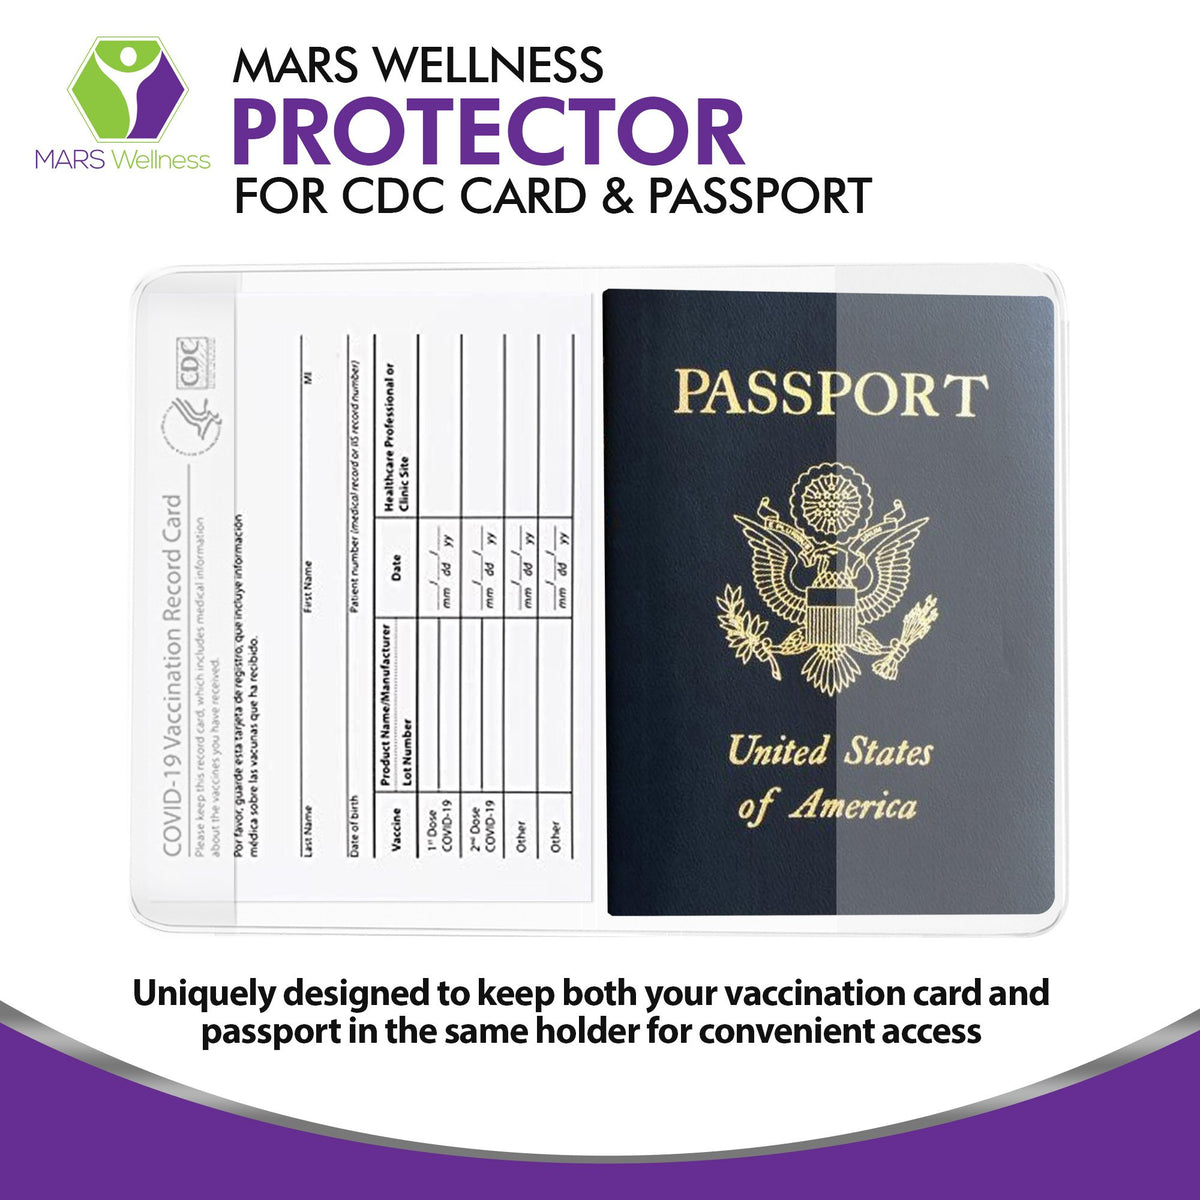 CDC Vaccination Card Protector Passport Holder Combo, Immunization Record Vaccine Card Holder, 5-1/8” x 7-1/4” Inches - ID Card Name Tag Badge Holders, Clear Plastic Sleeve - 5 Pack - Mars Med Supply